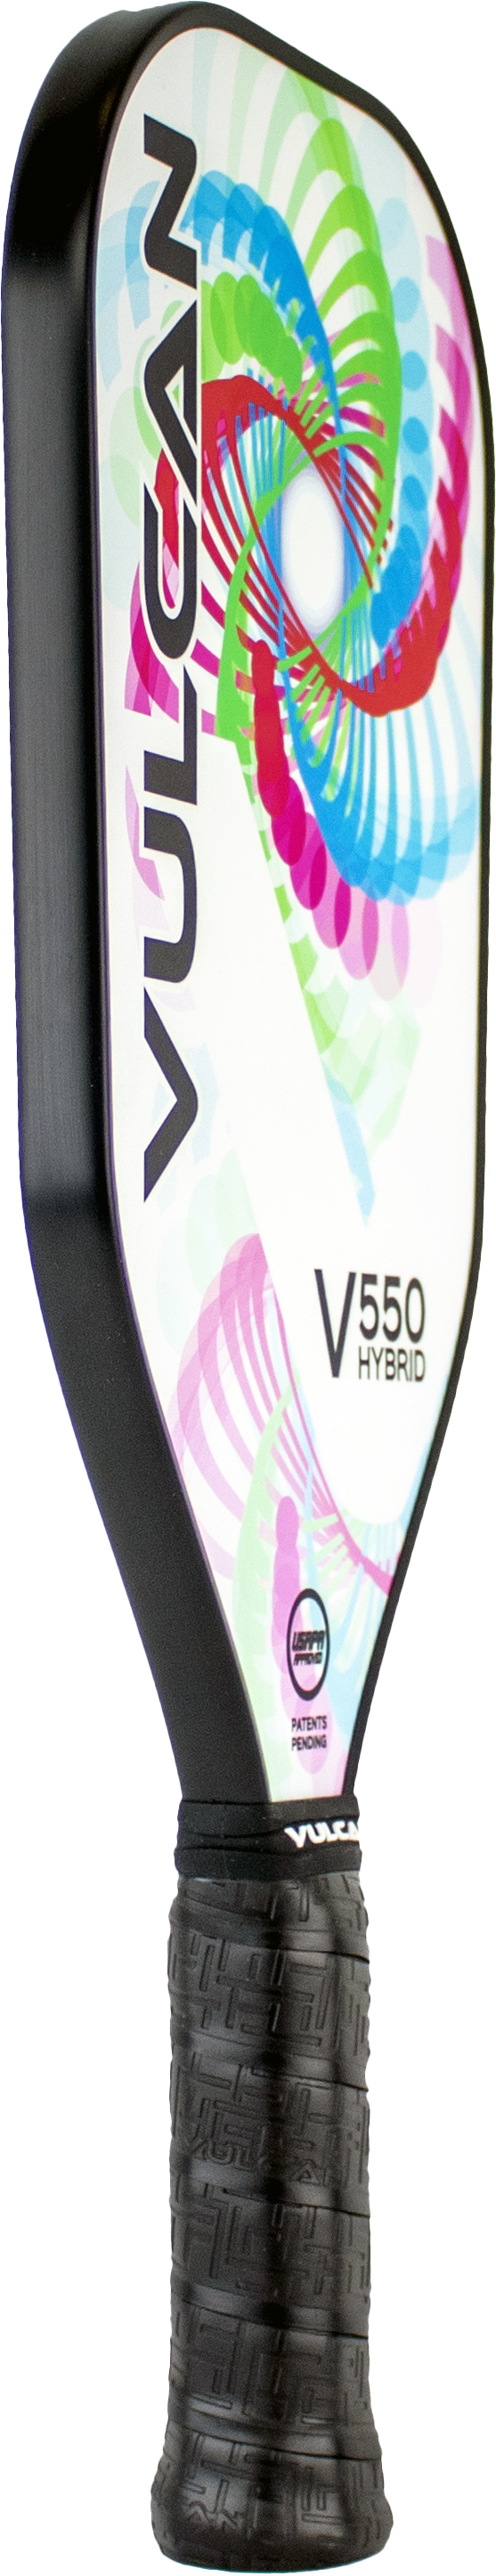 The Vulcan V550 Elongated Pickleball Paddle by Vulcan is a black and white disc with a colorful design on it.